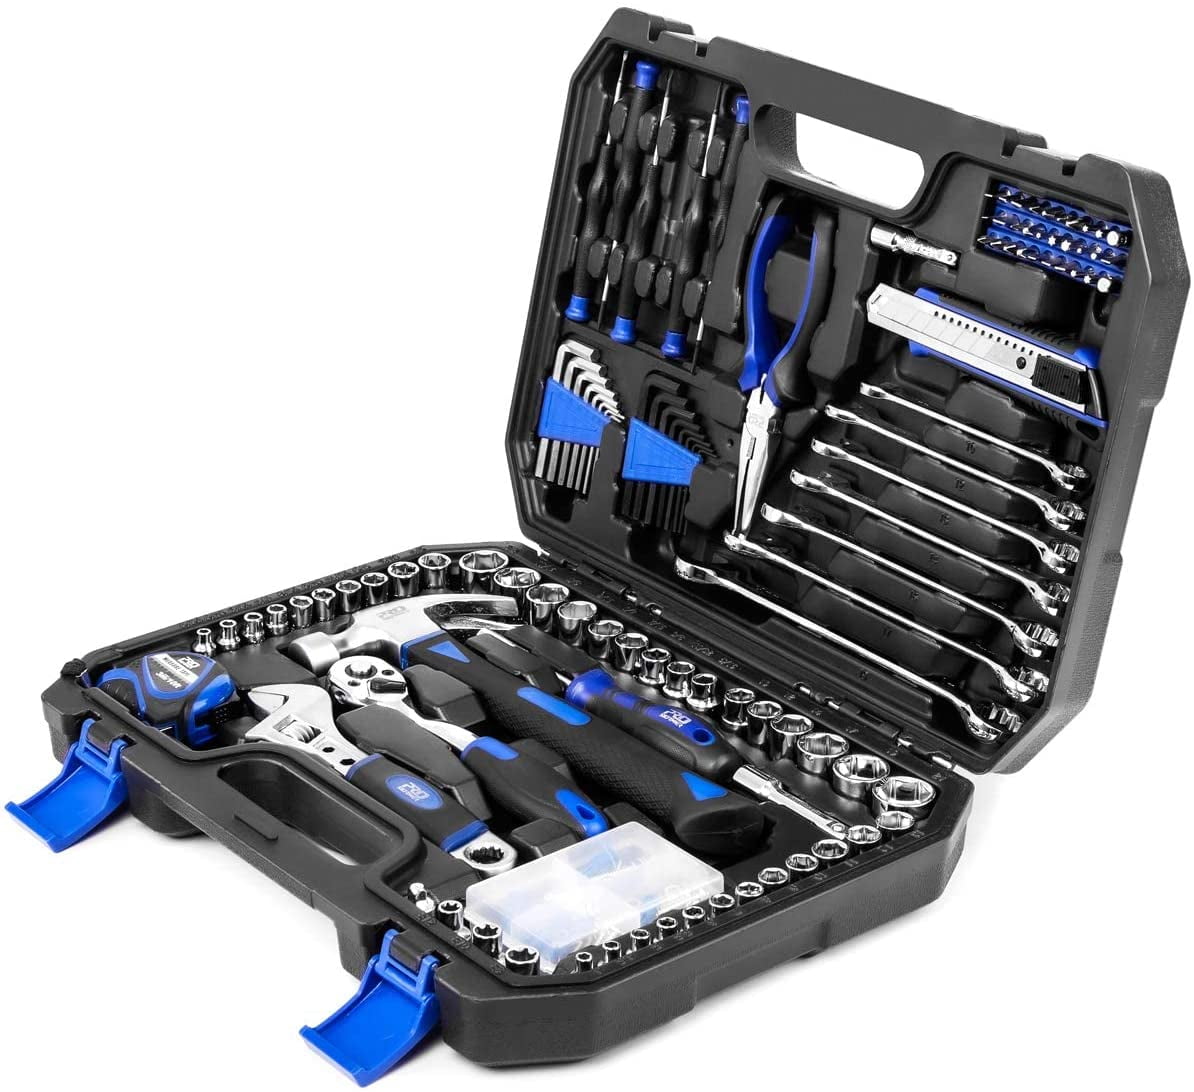 148-Piece Hand Tool Set, PROSTORMER Mixed Socket Wrench Household/Auto  Repair Tool Kit with Toolbox Storage Case for Mechanical Repair, DIY, Home 